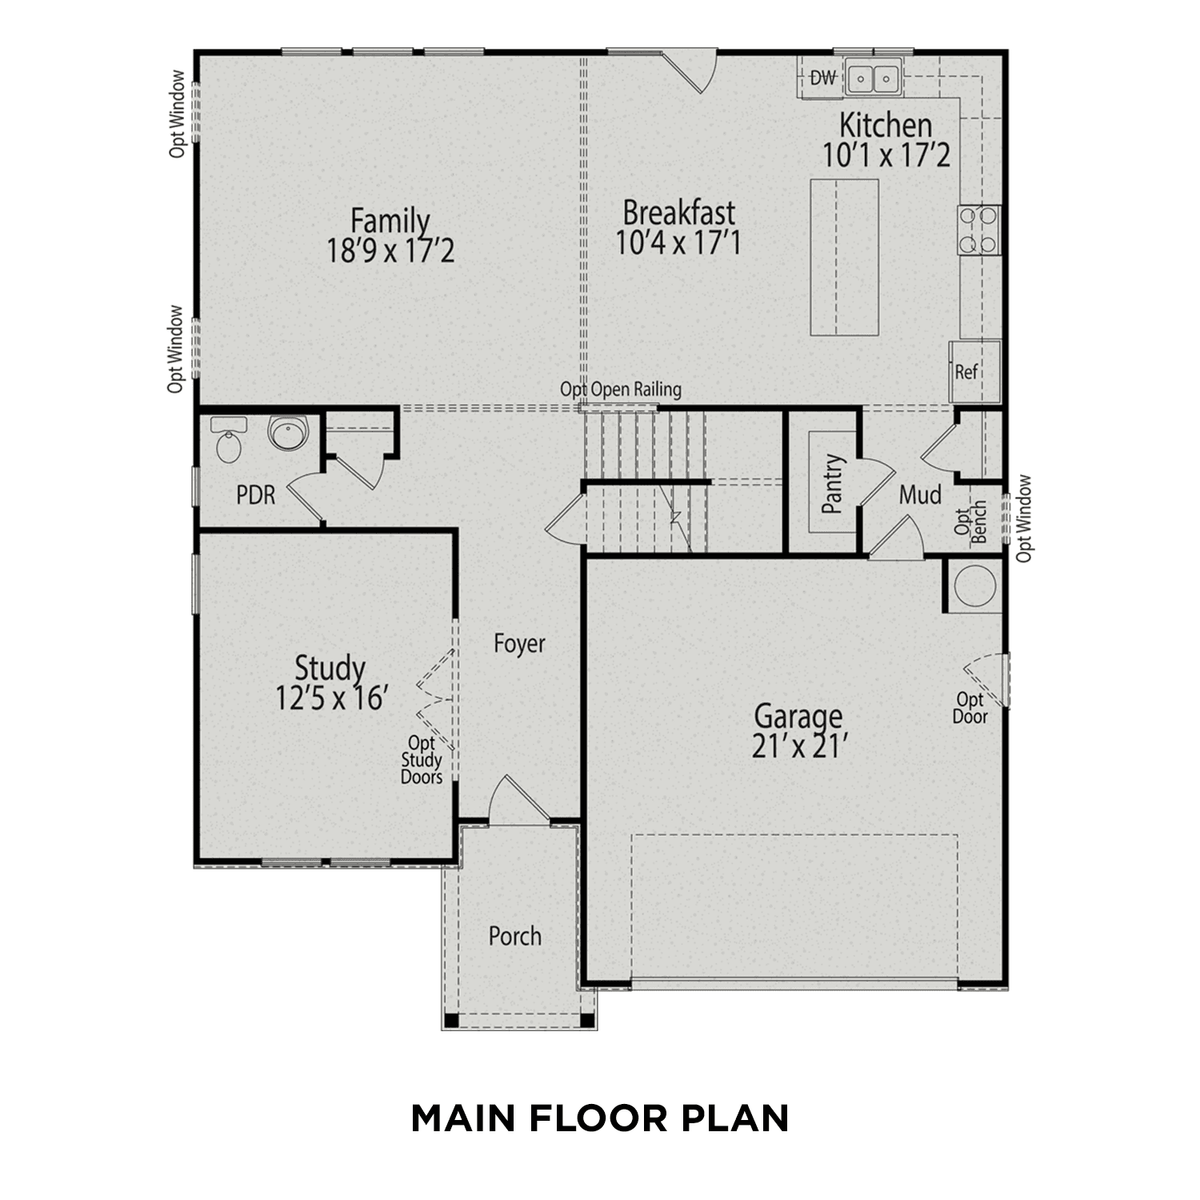 1 - The Hickory D floor plan layout for 123 Golden Leaf Farms Road in Davidson Homes' Tobacco Road community.